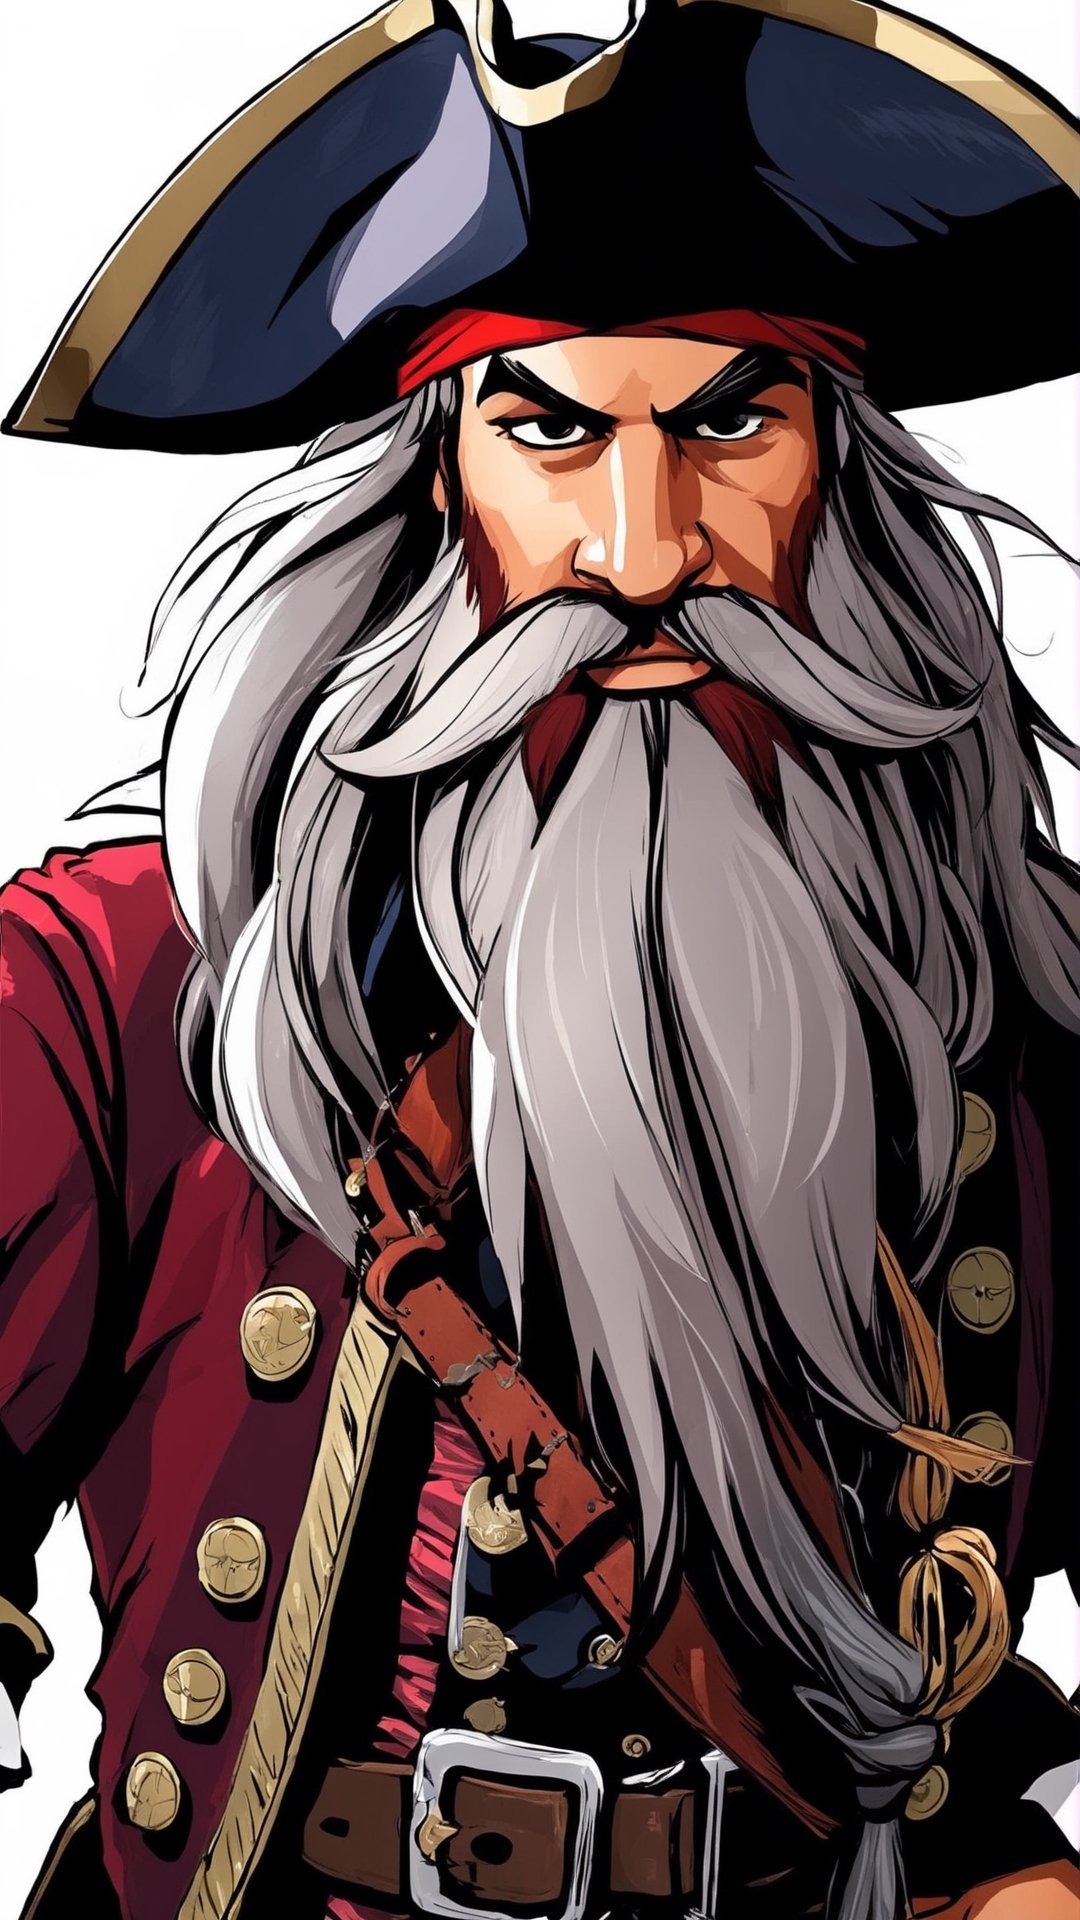 Imagine a pirate who is the captain of a pirate ship, dirty with a long beard, wild